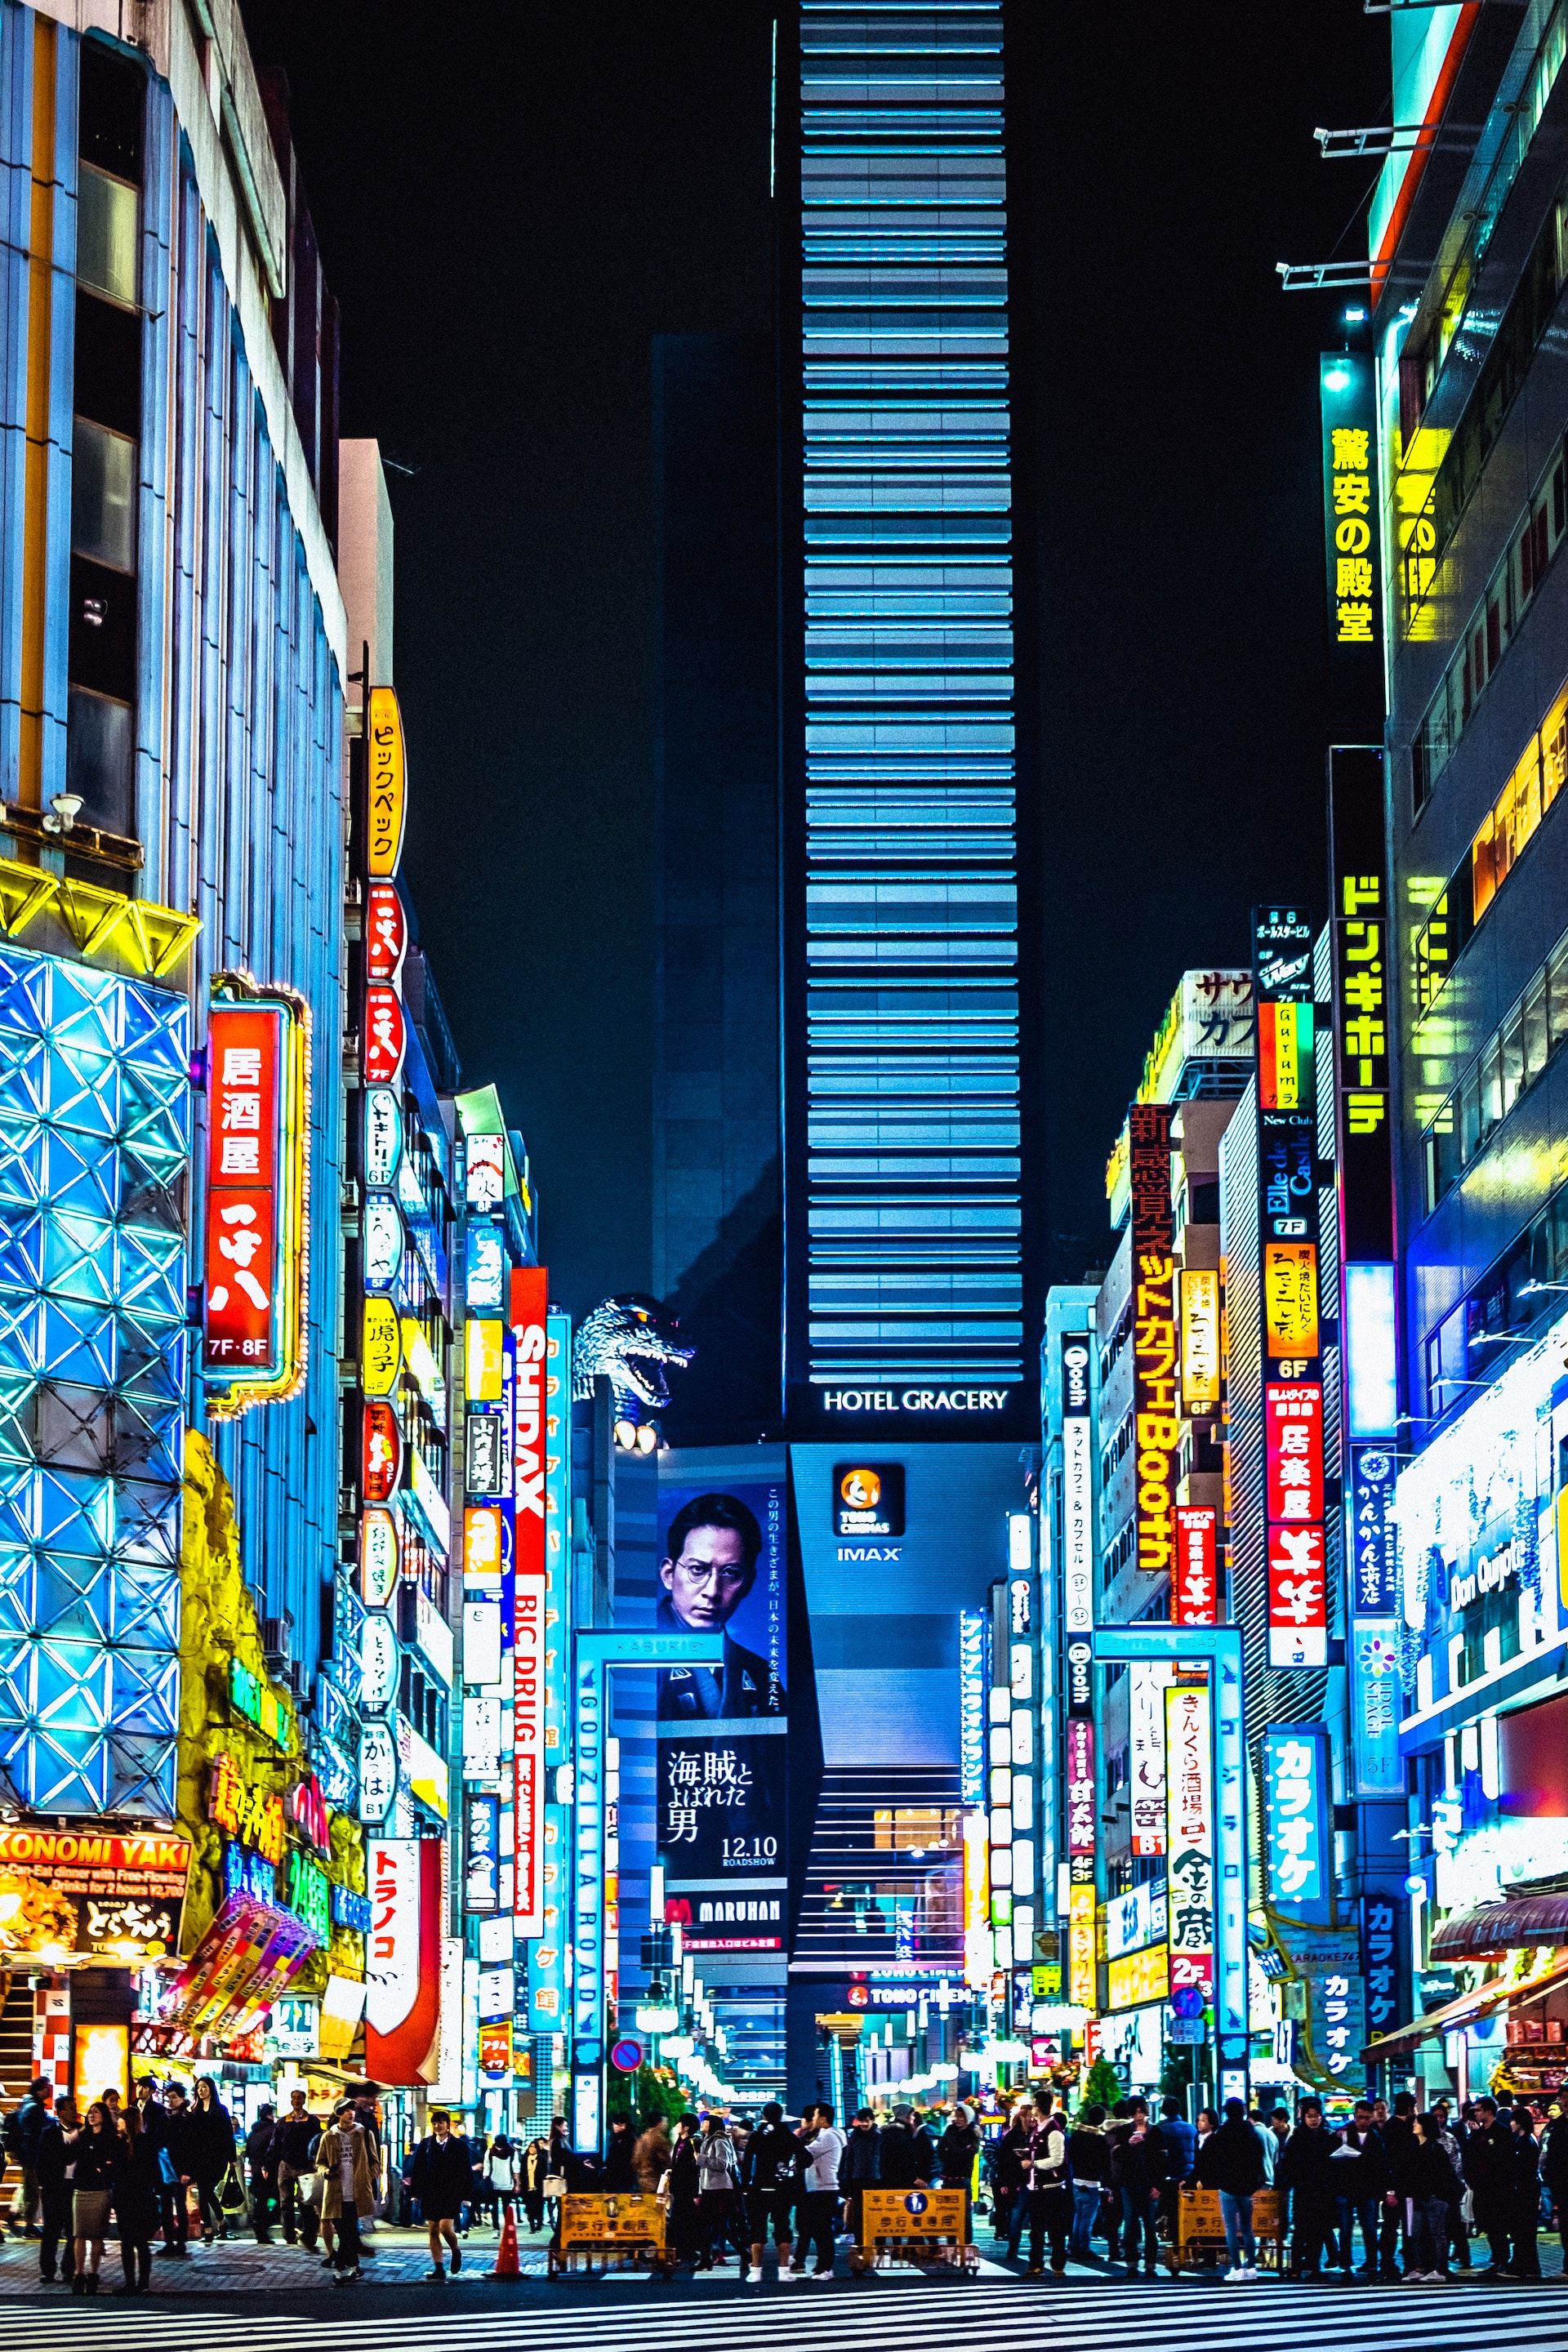 Street view of Tokyo lit up at night with people along, Japan 